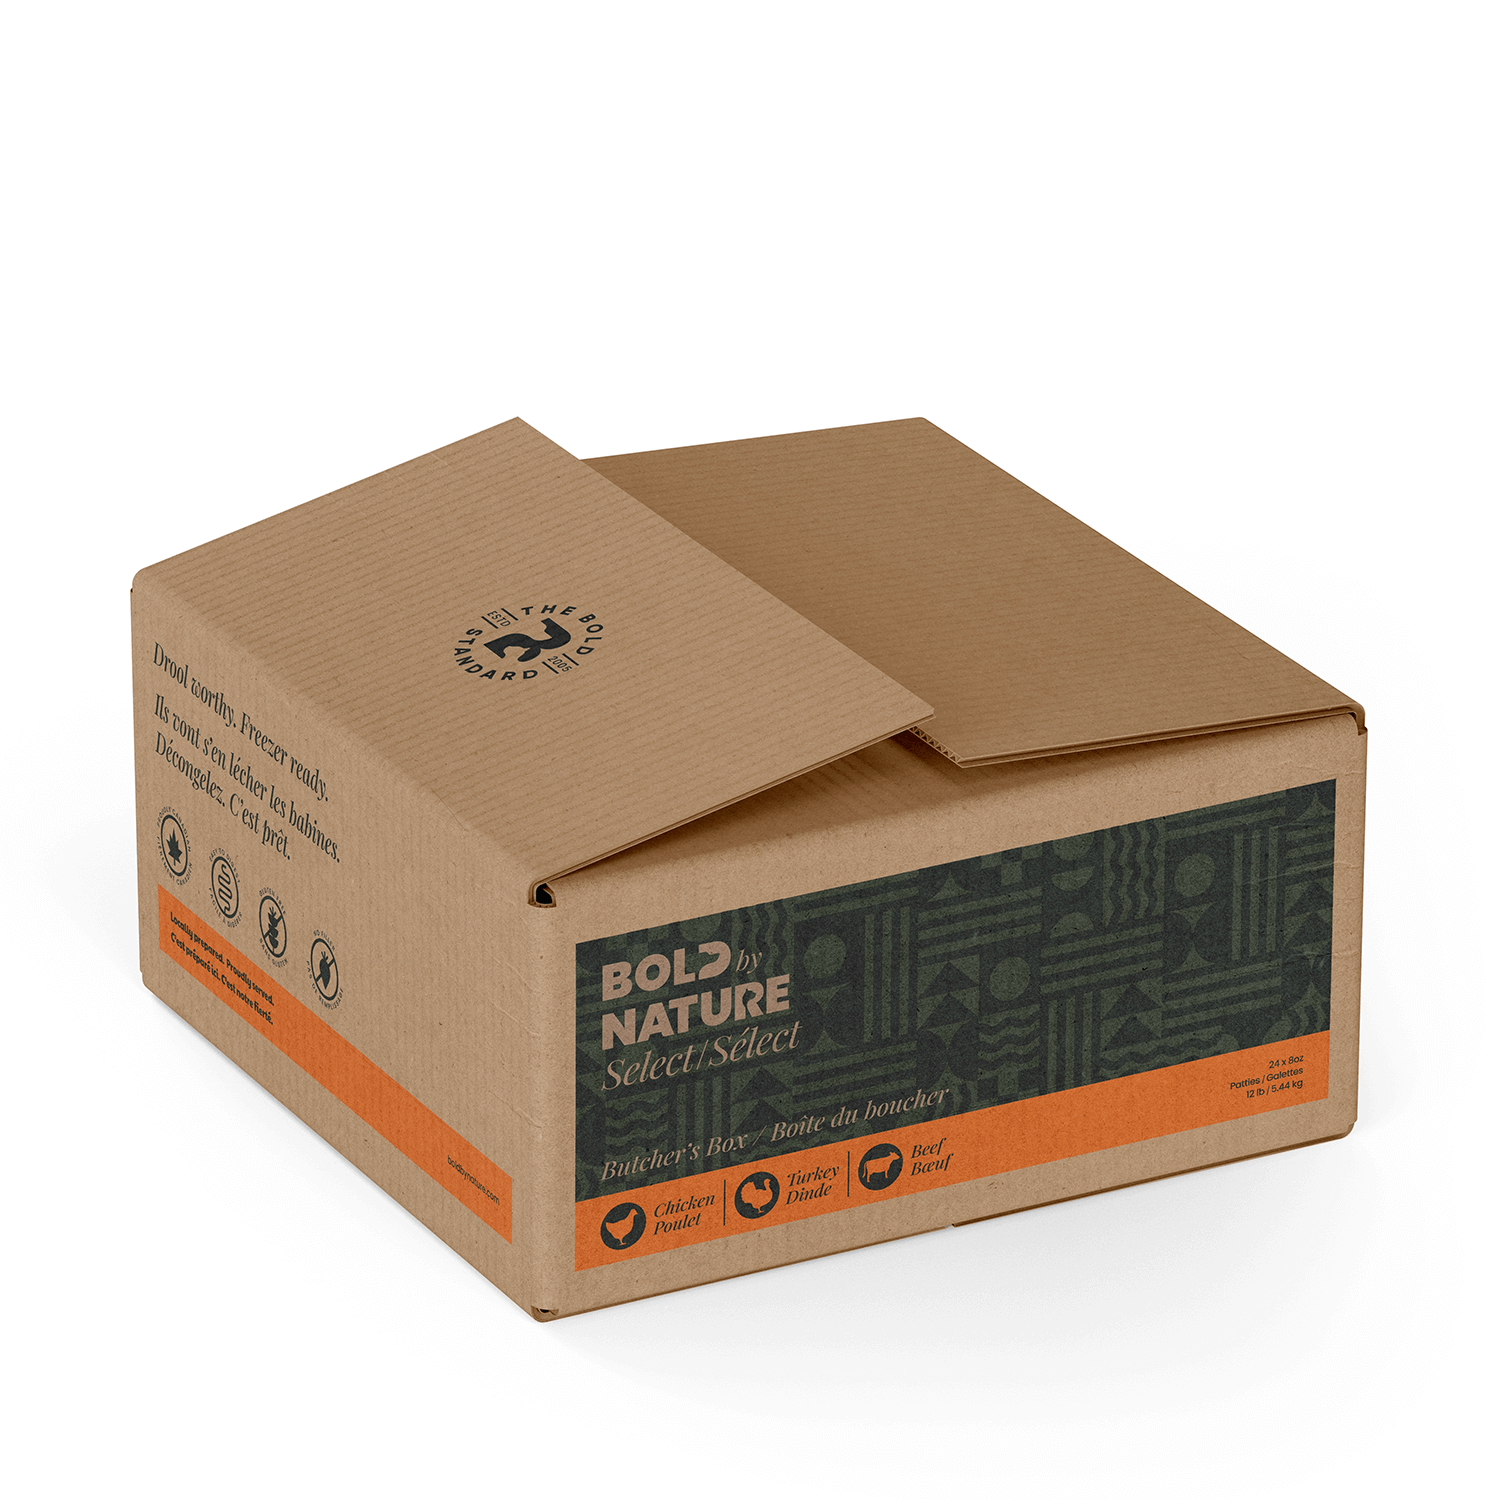 Bold by Nature (Bold Raw) - Chicken Butchers Box For Dogs - Frozen Product